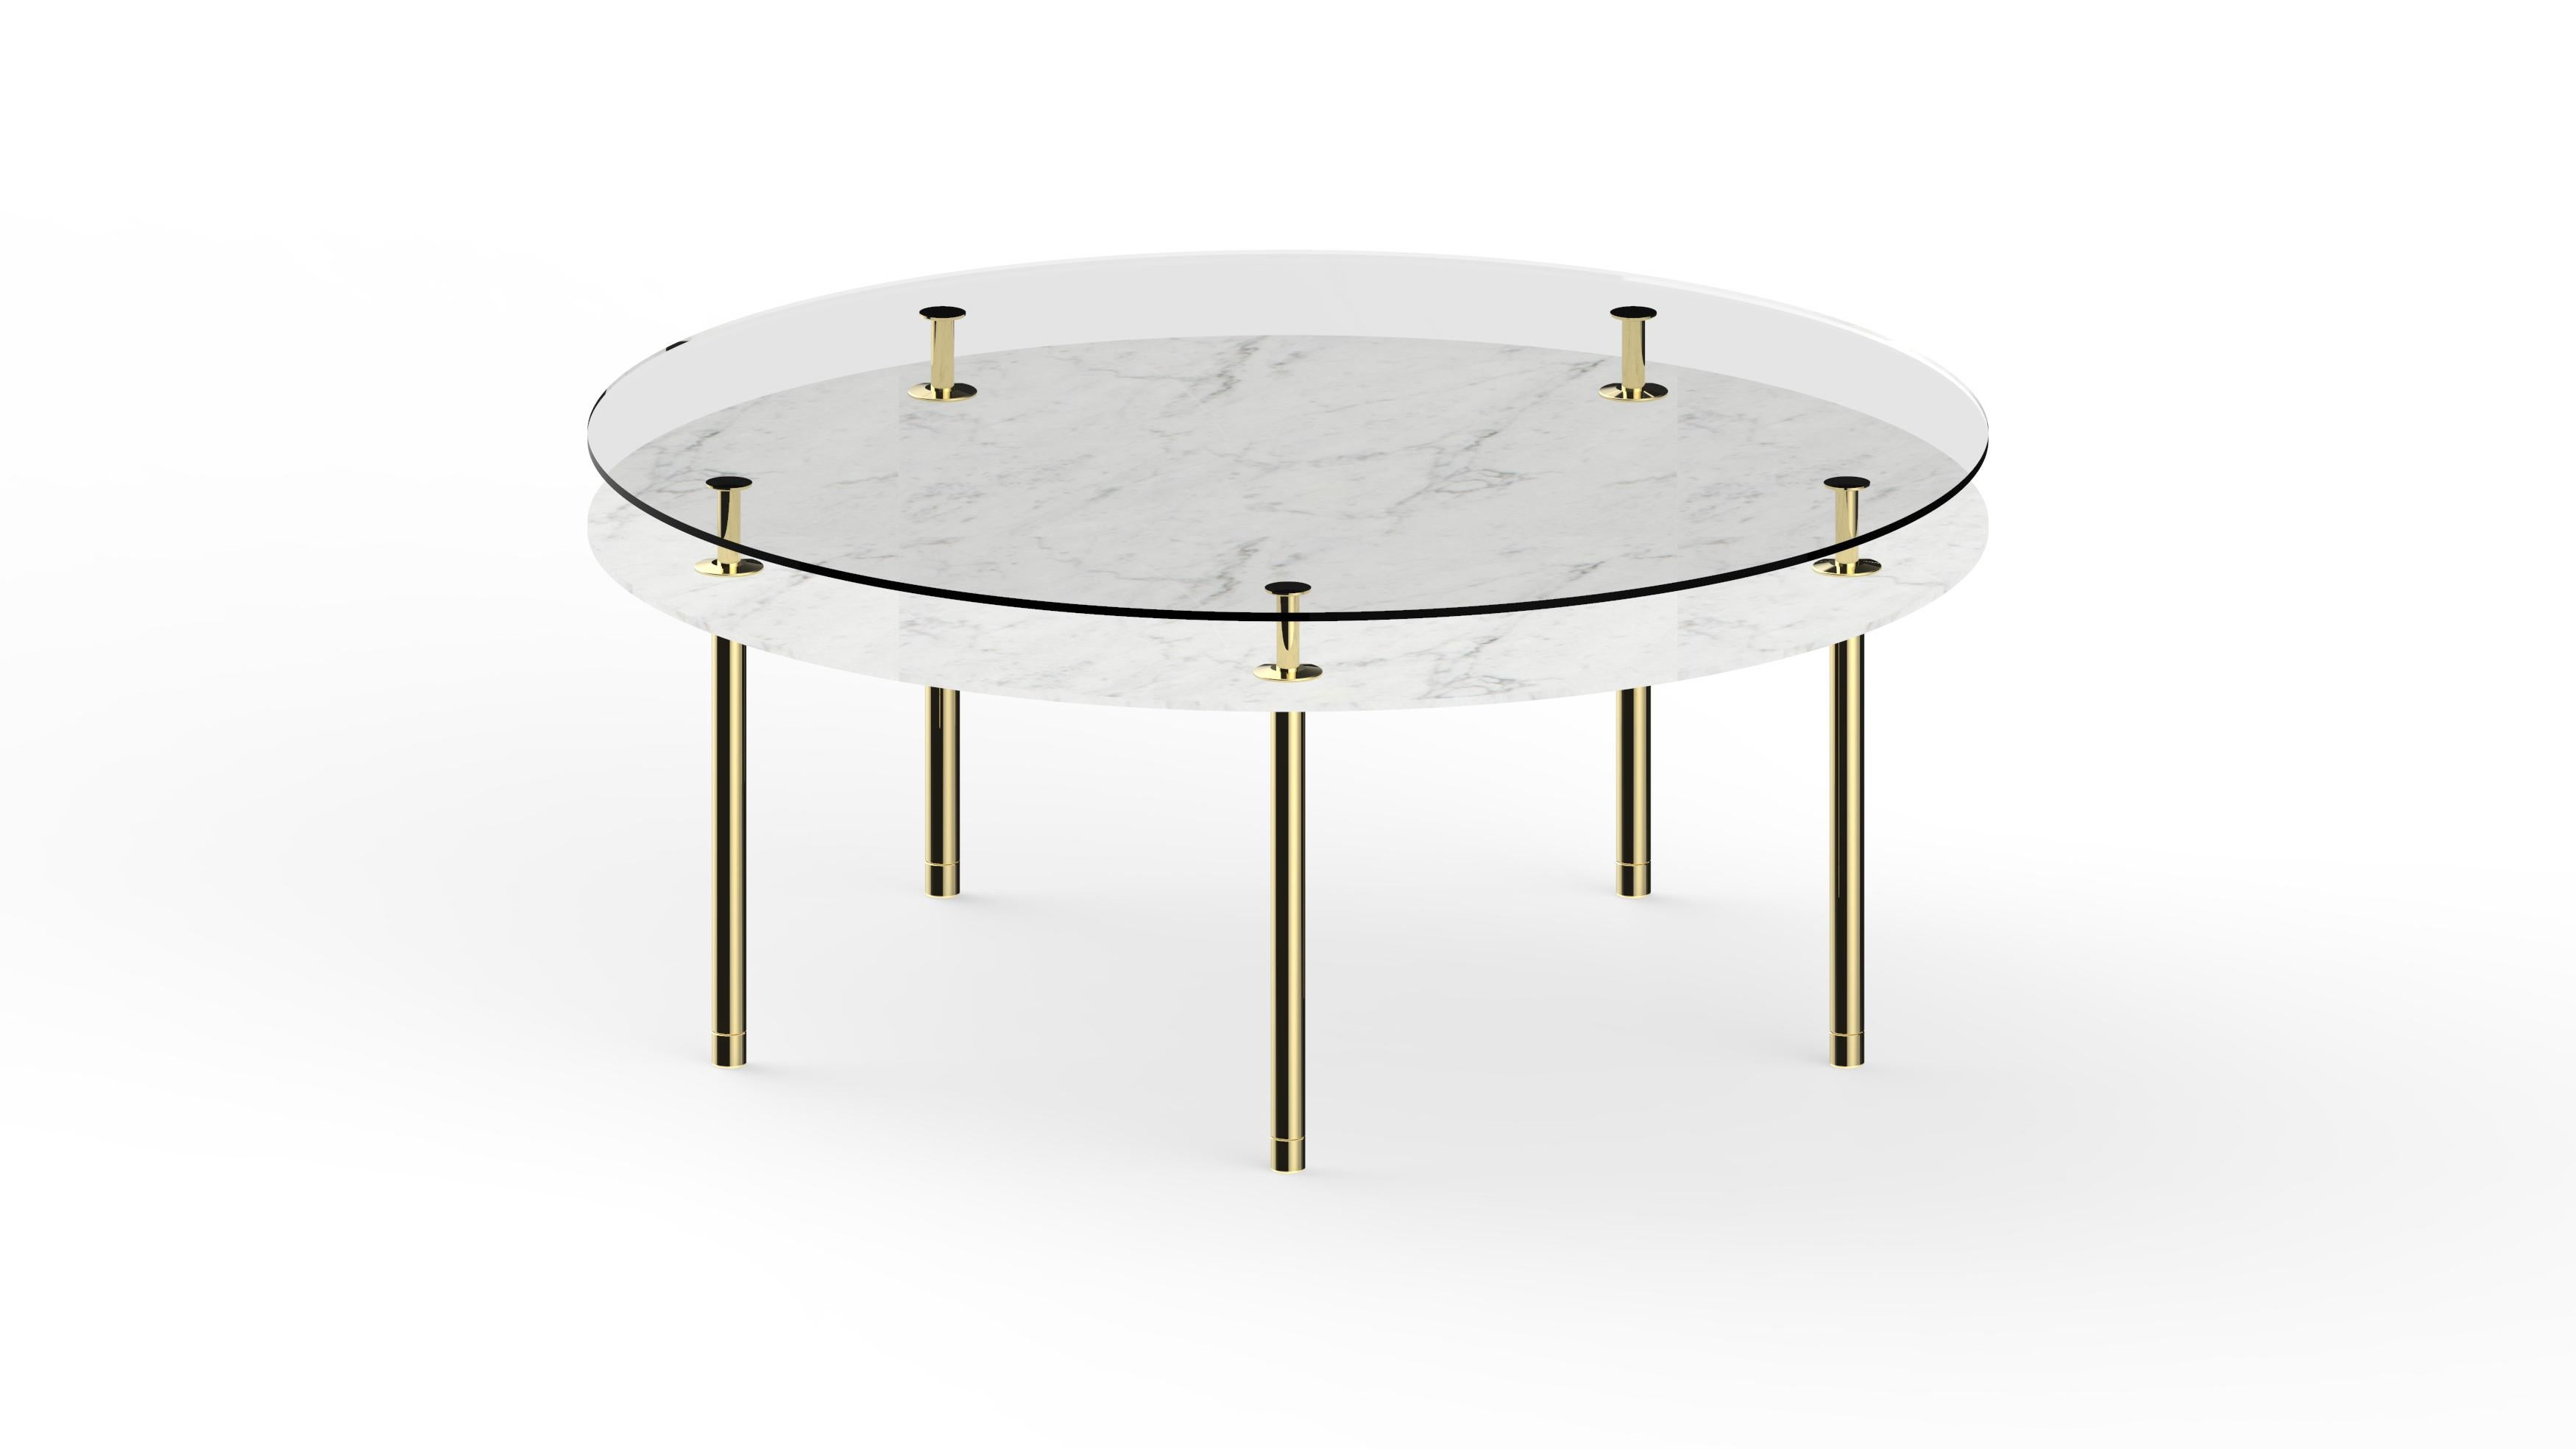 Round table in crystal and brass. The designer imagines a turning point in the use of such a precious finishes such as polished brass: from the idea of almost a unique object in its perfect craftsmanship, to the system to be built starting from the